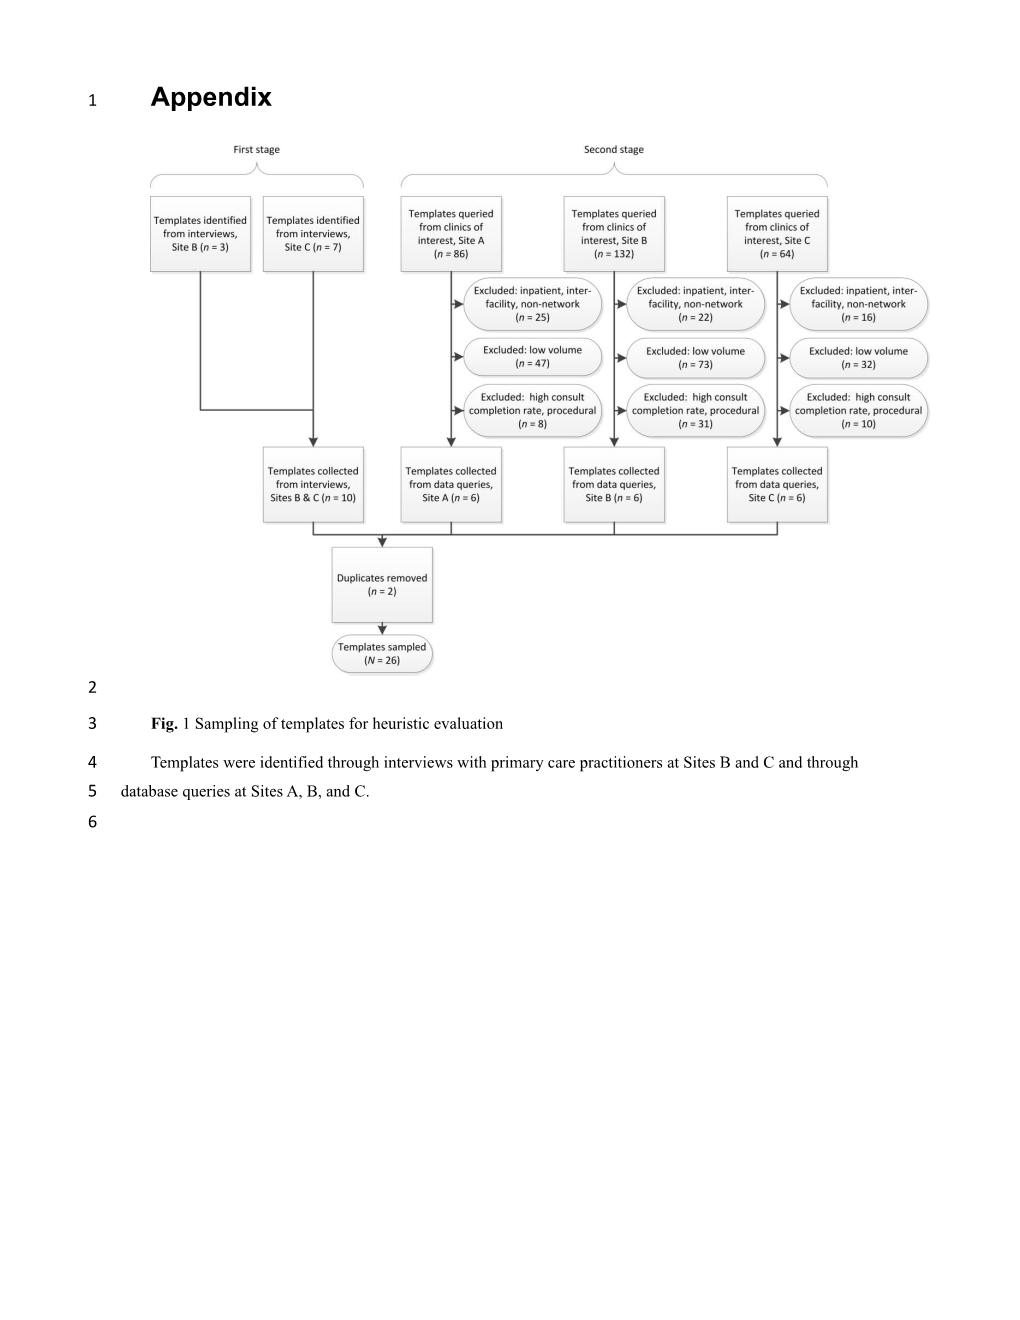 Fig. 1Sampling of Templates for Heuristic Evaluation